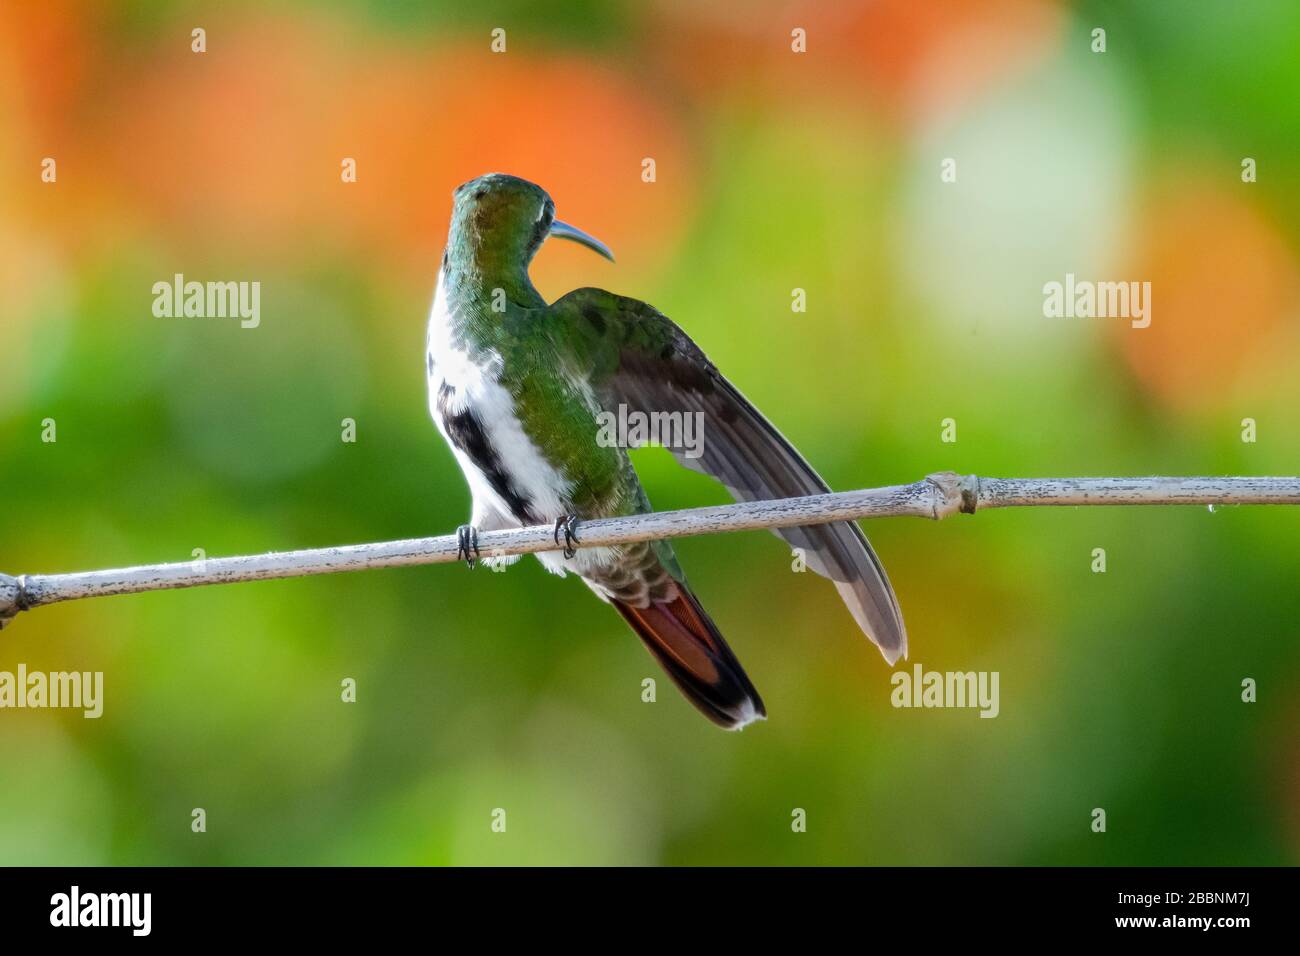 A female Black-throated Mango looking back to defend her territory with a honeysuckle plant blurred in the background. Stock Photo